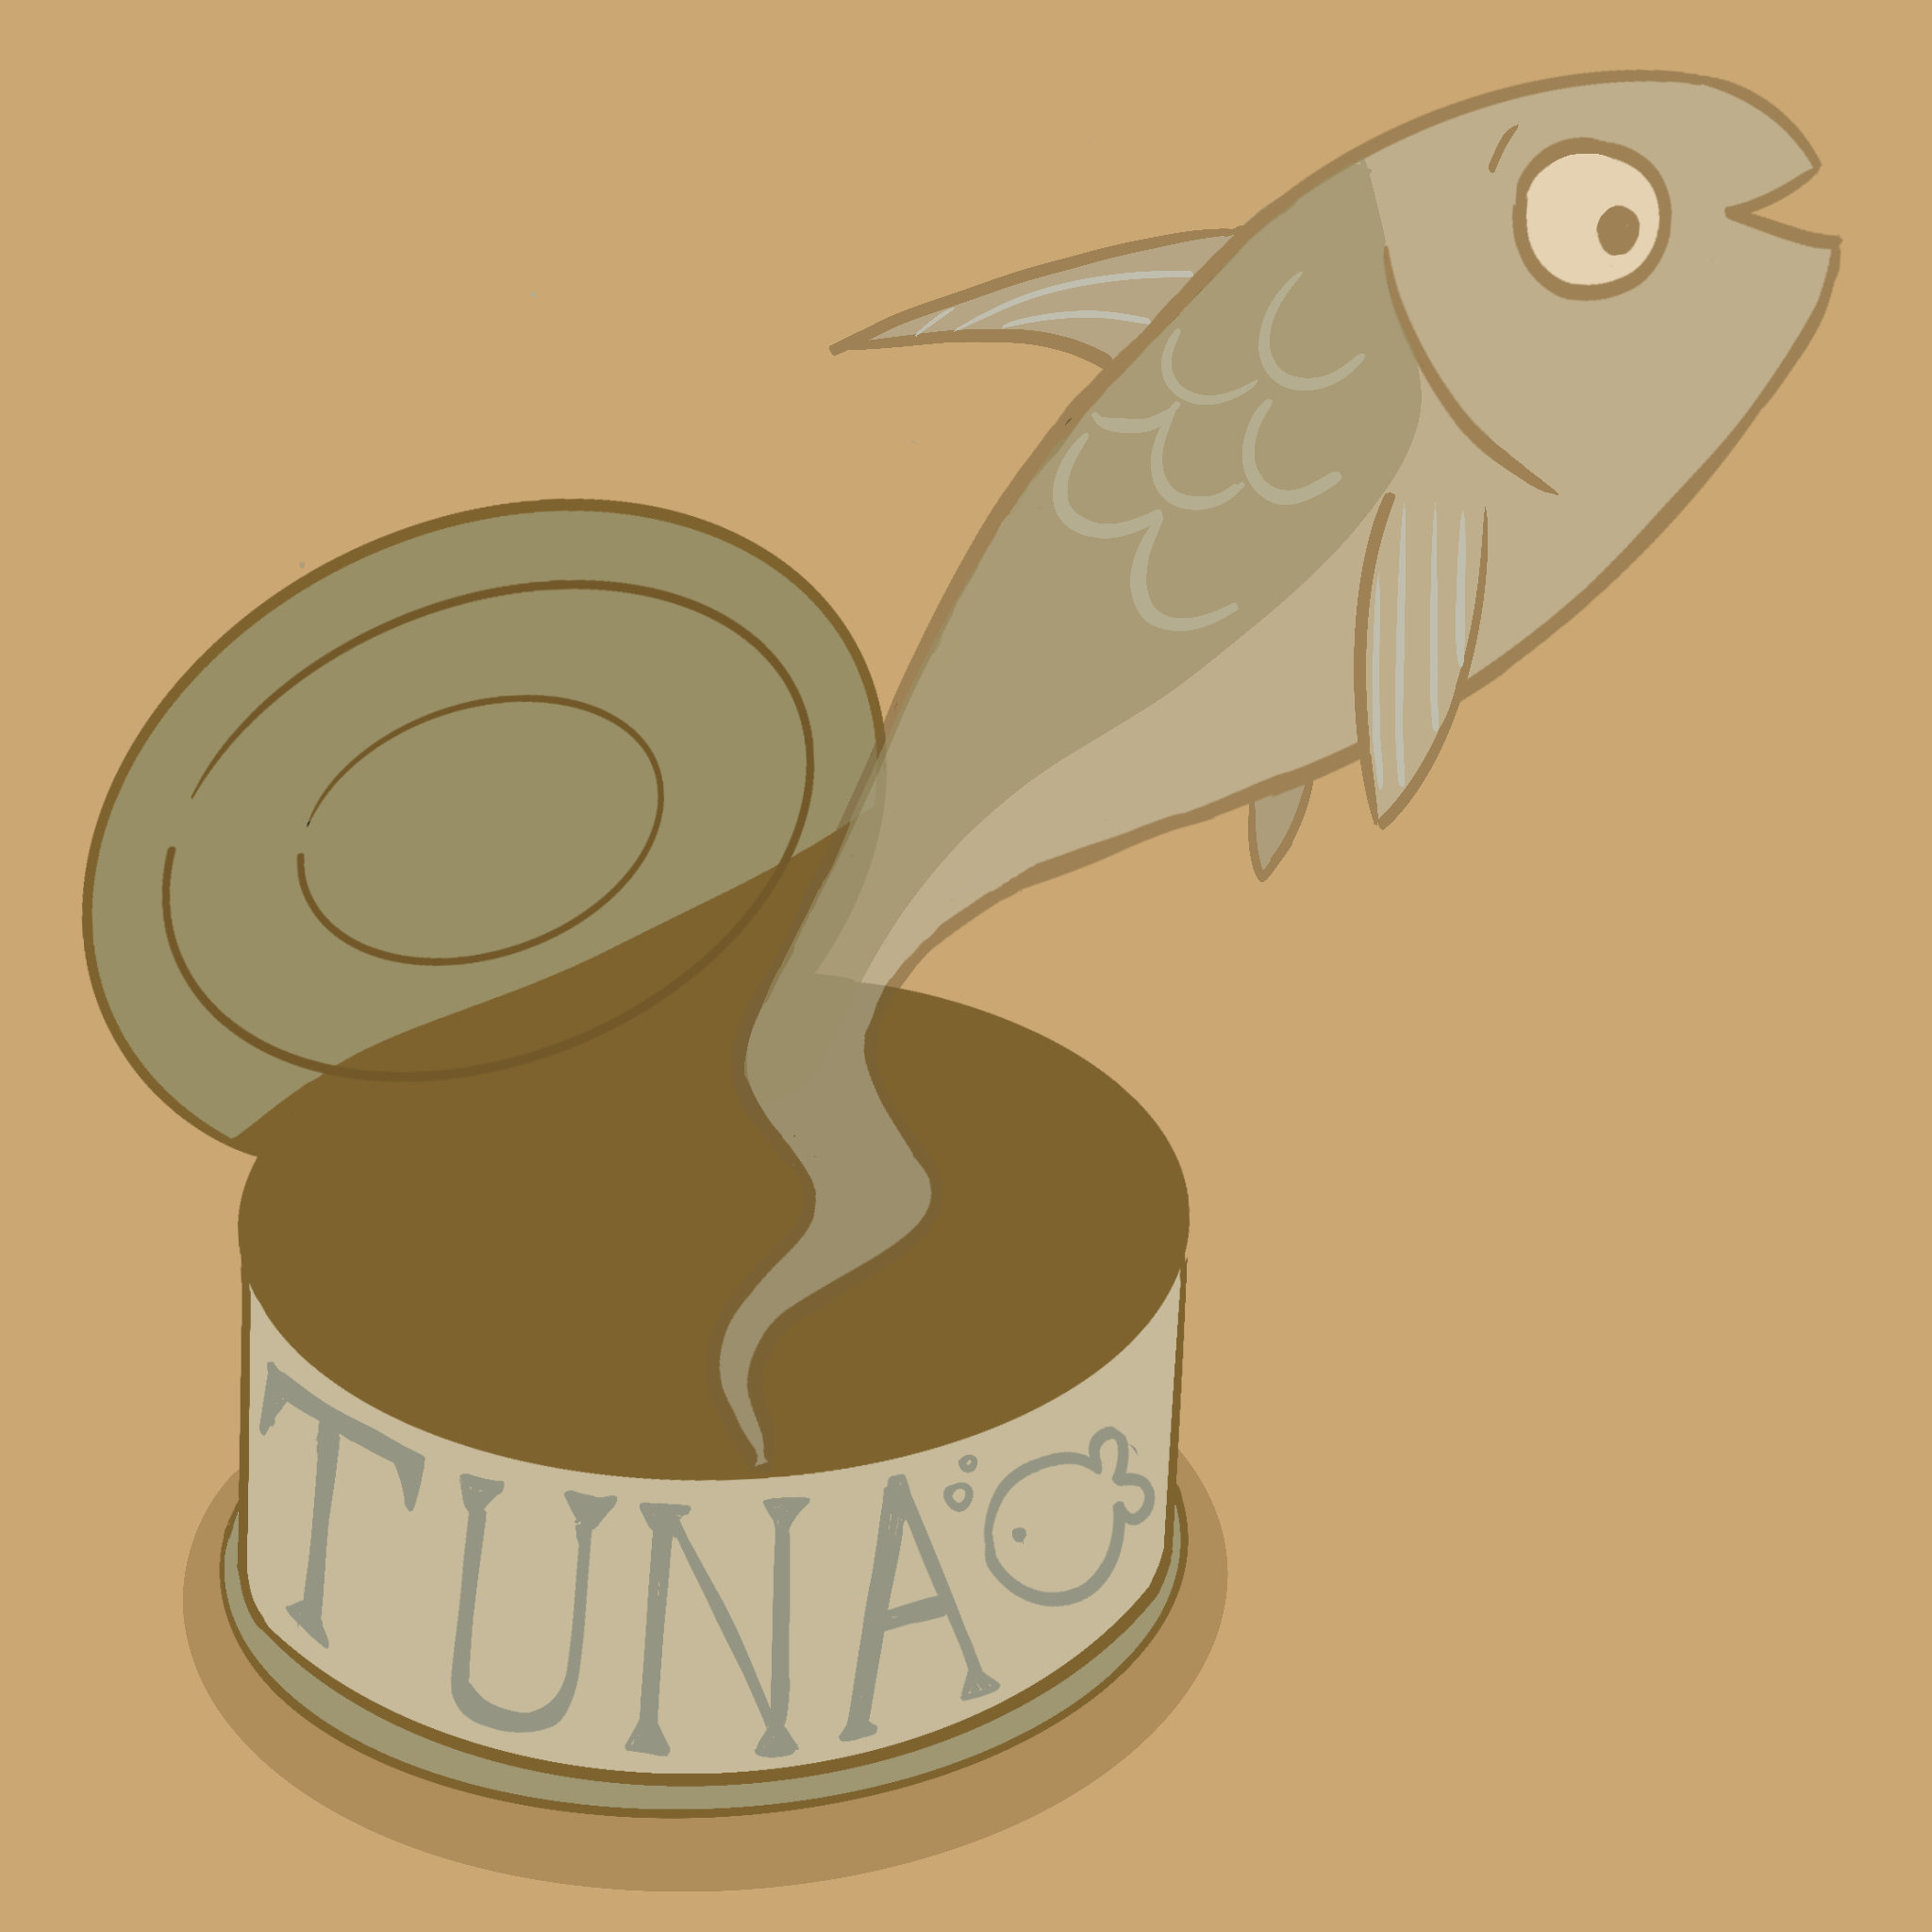 Digital line drawing in sepia tones of an open can labelled 'tuna', with a translucent fish emerging from it. The fish looks happy to be alive despite being a ghost